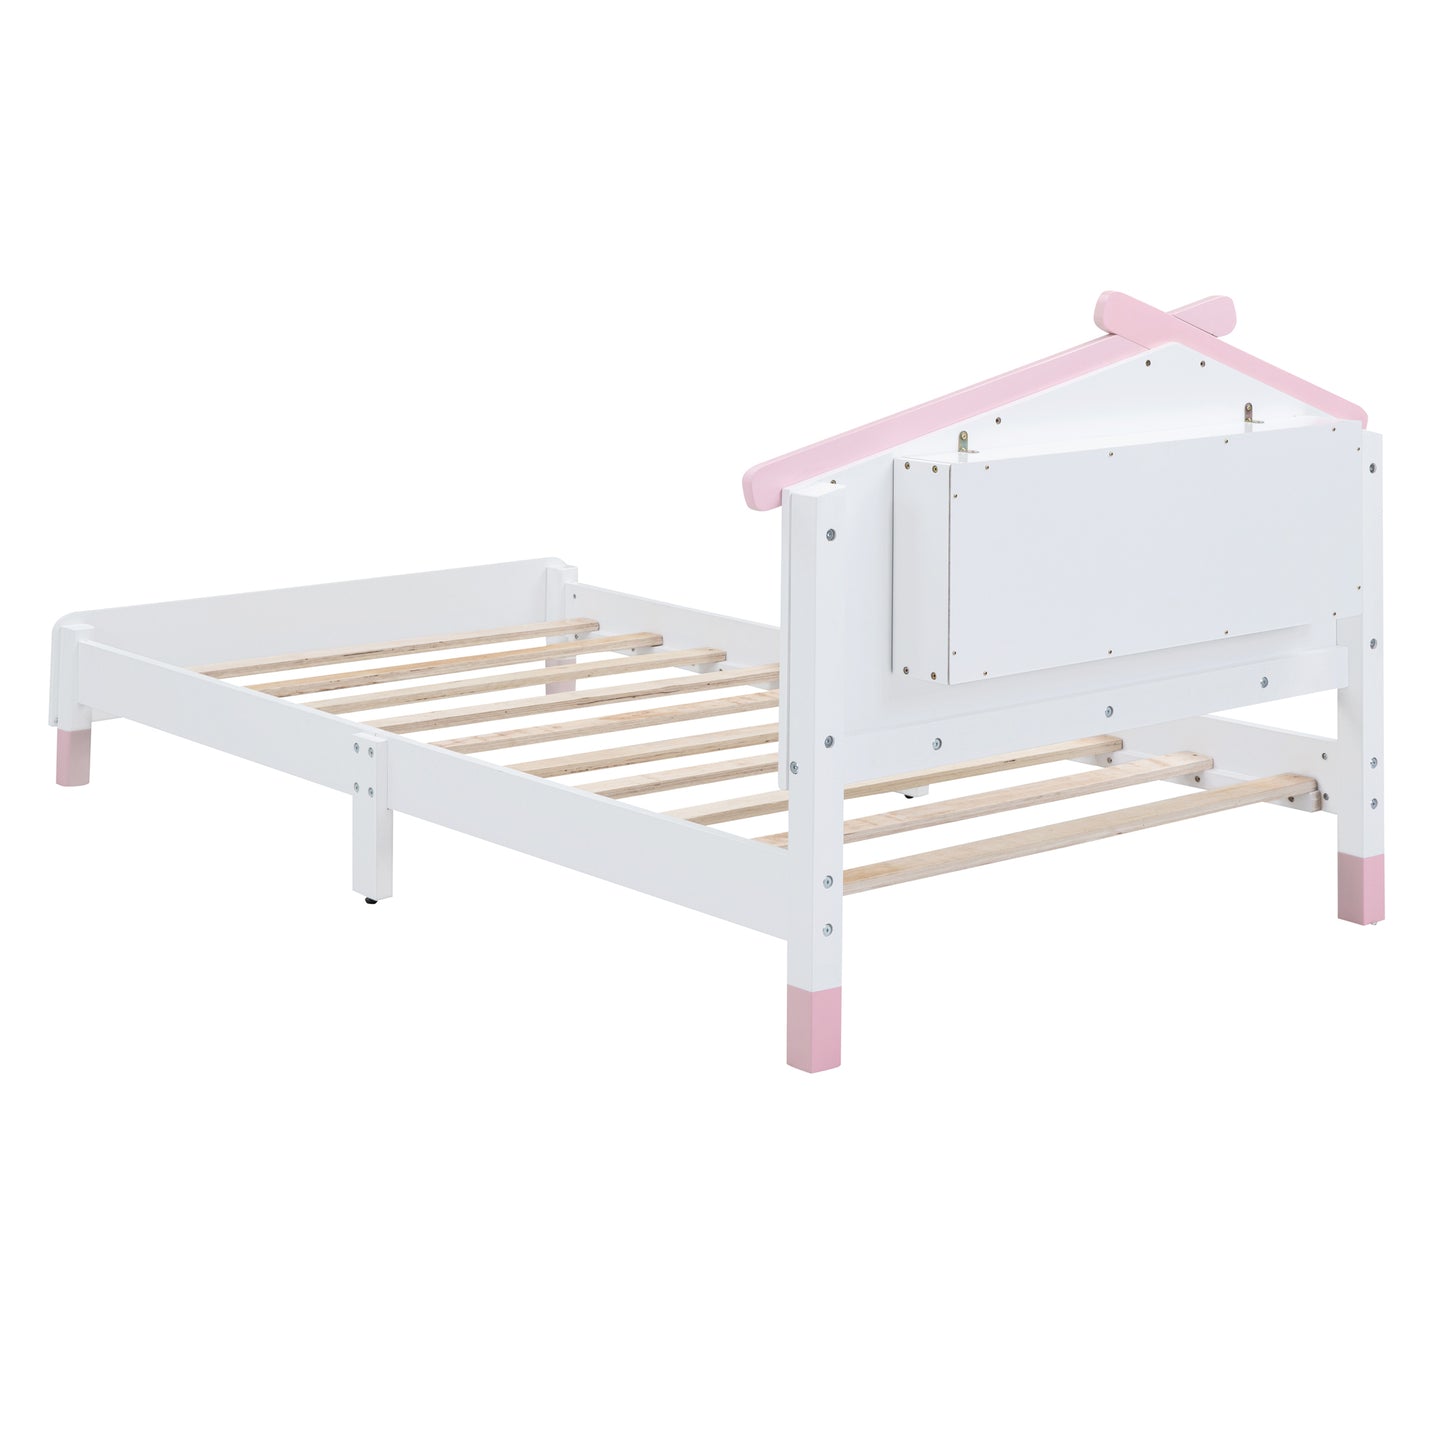 Twin Size Wood Platform Bed with House-shaped Headboard and Motion Activated Night Lights (White+Pink)